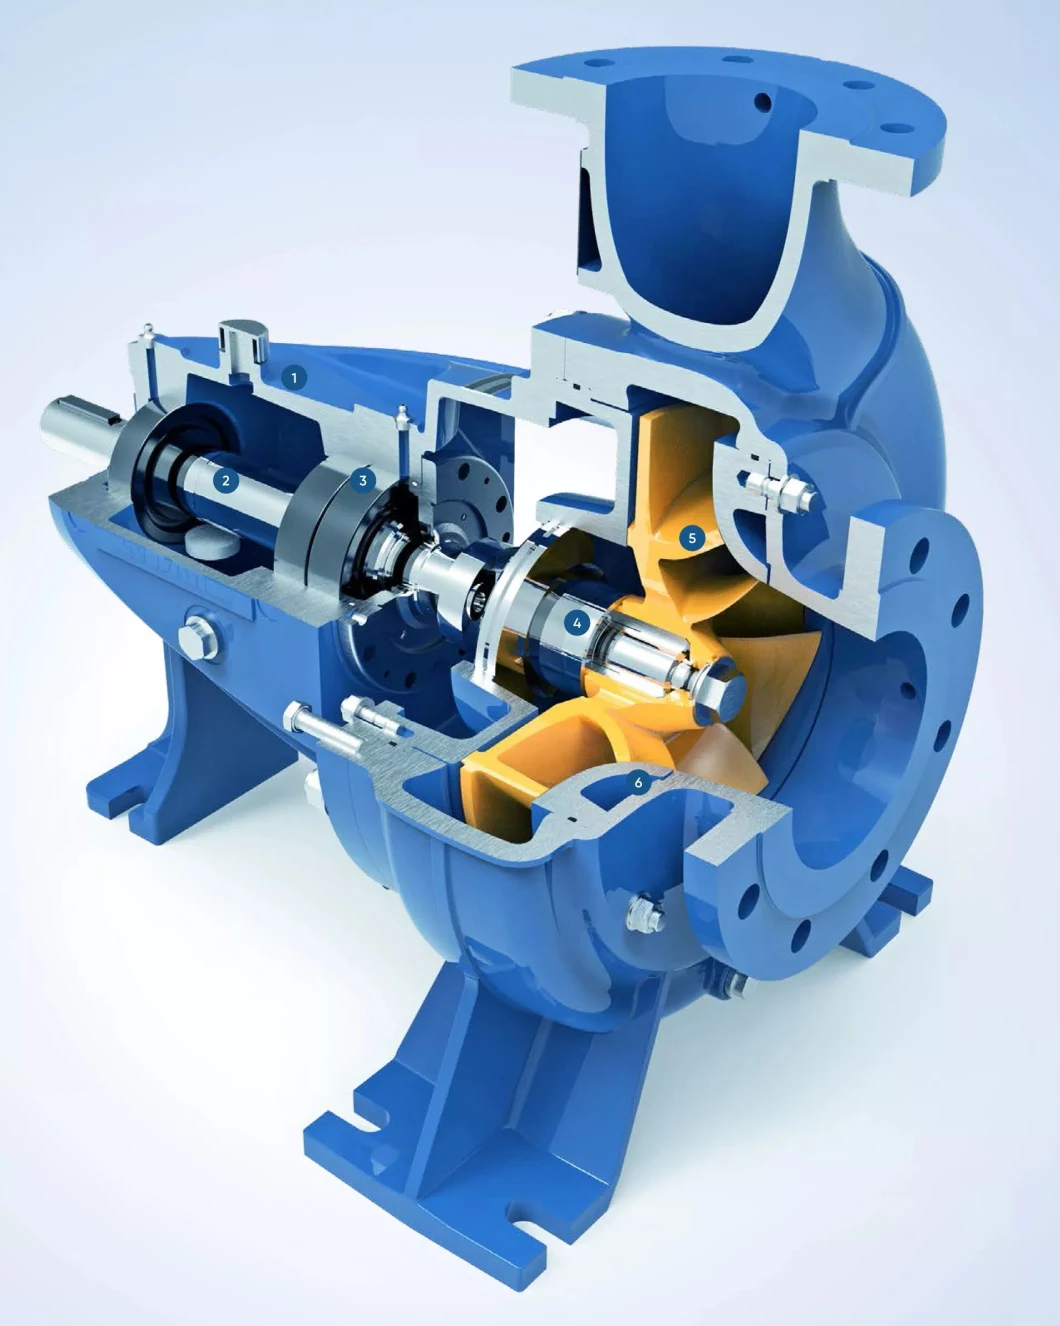 Slurry Froth Pumps for Froth Flotation, Mining, Paper/Pulp, and Wastewater Applications